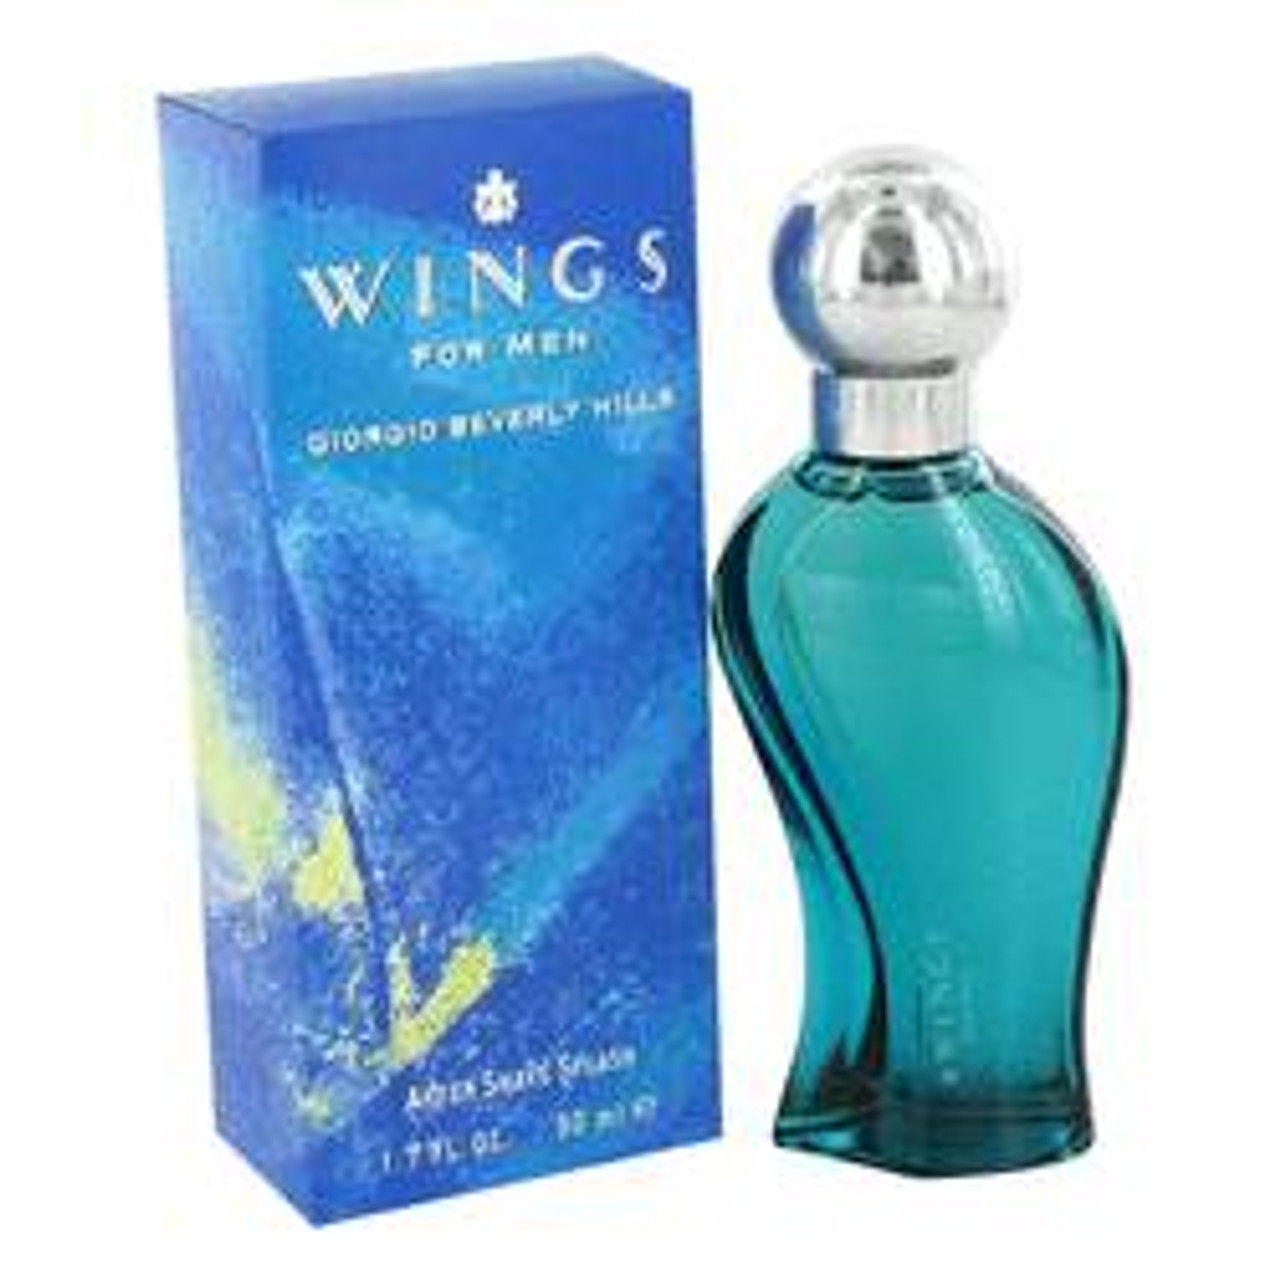 Wings Cologne By Giorgio Beverly Hills After Shave 1.7 oz for Men - [From 92.00 - Choose pk Qty ] - *Ships from Miami